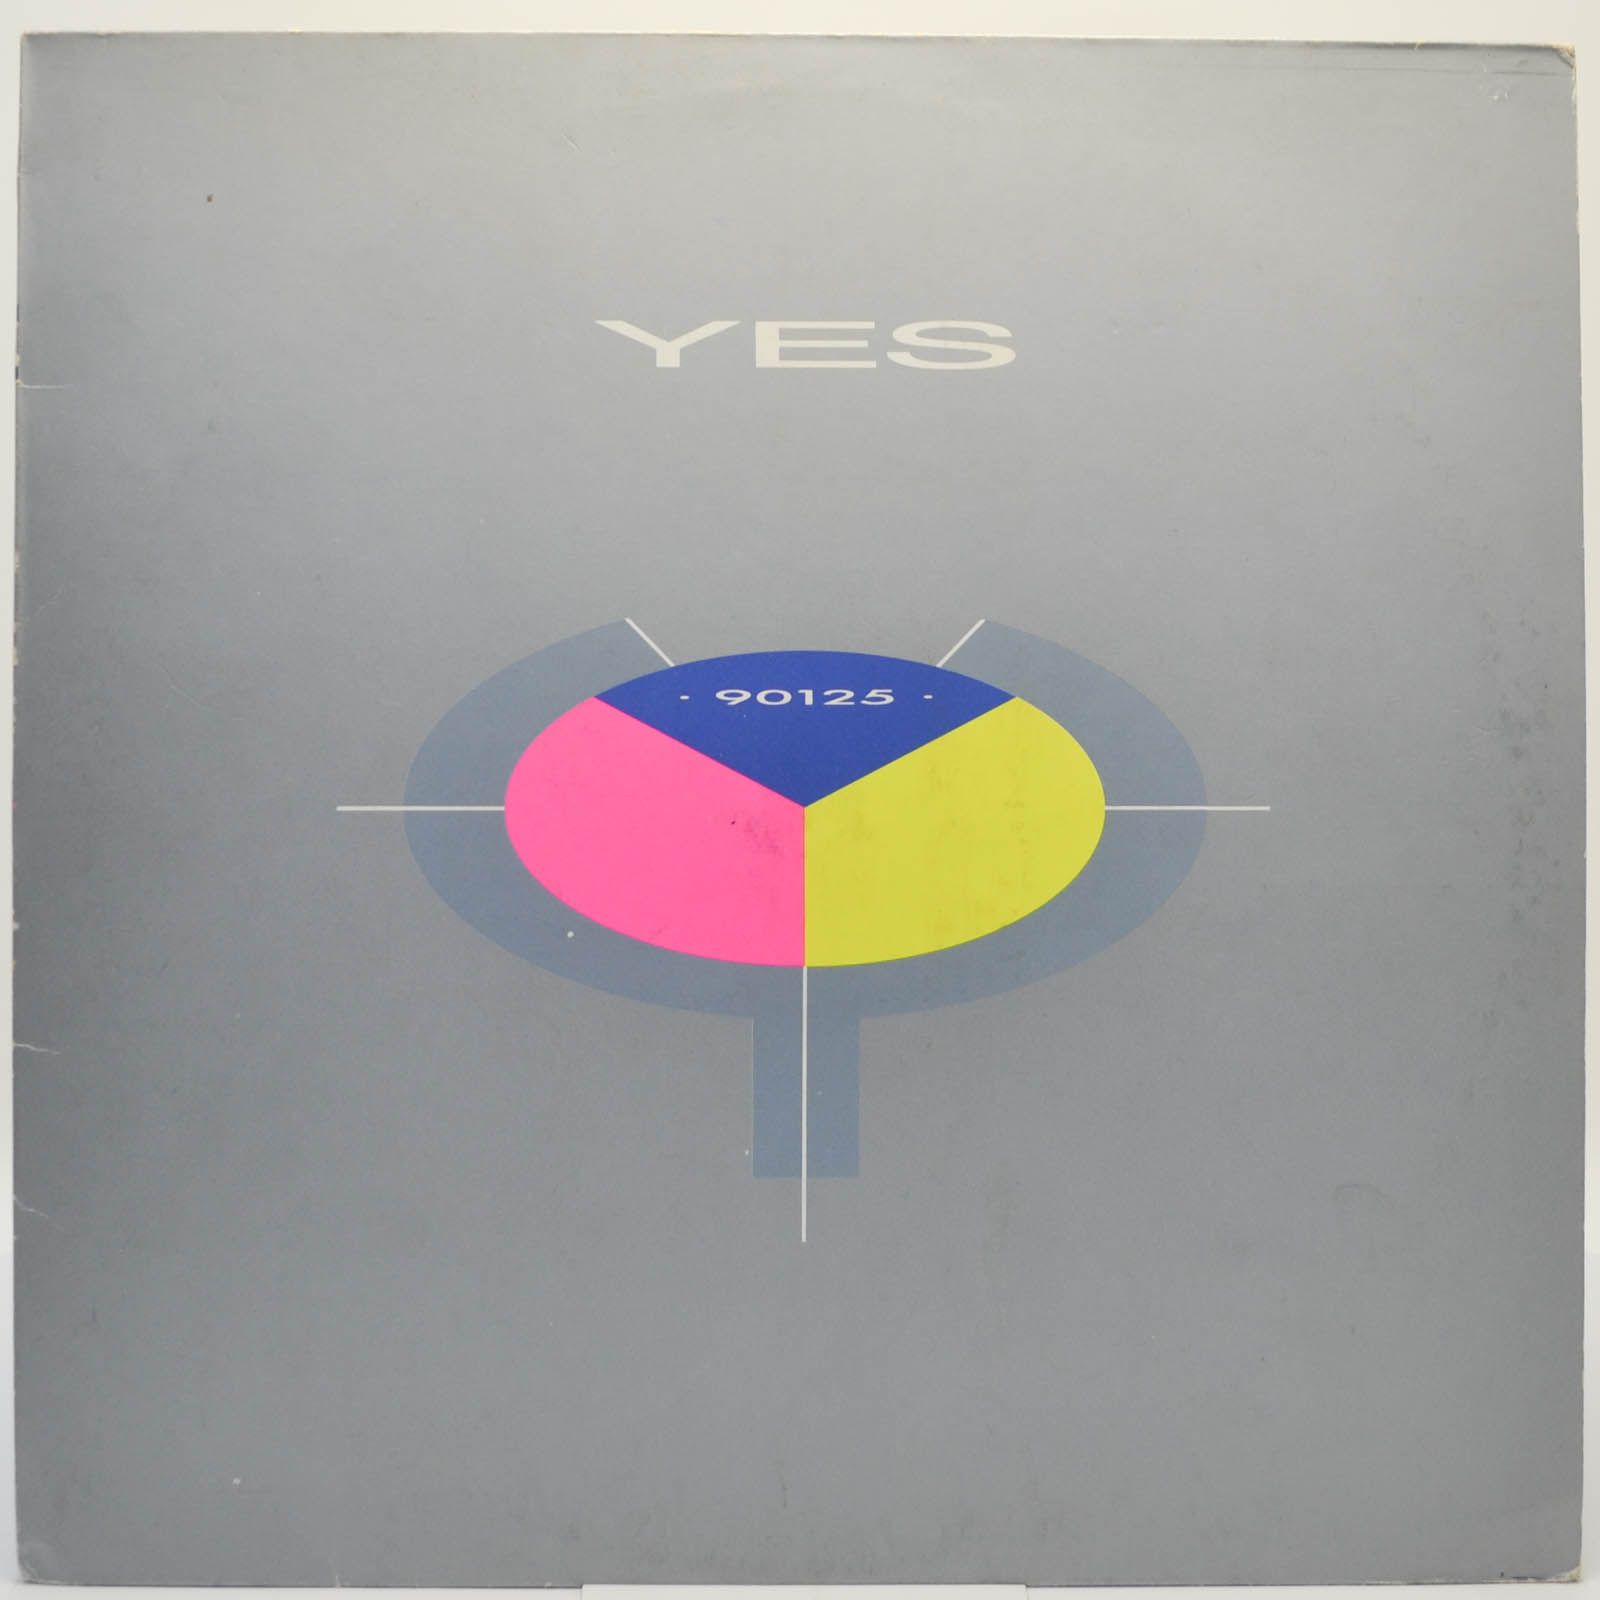 Yes — 90125, 1983